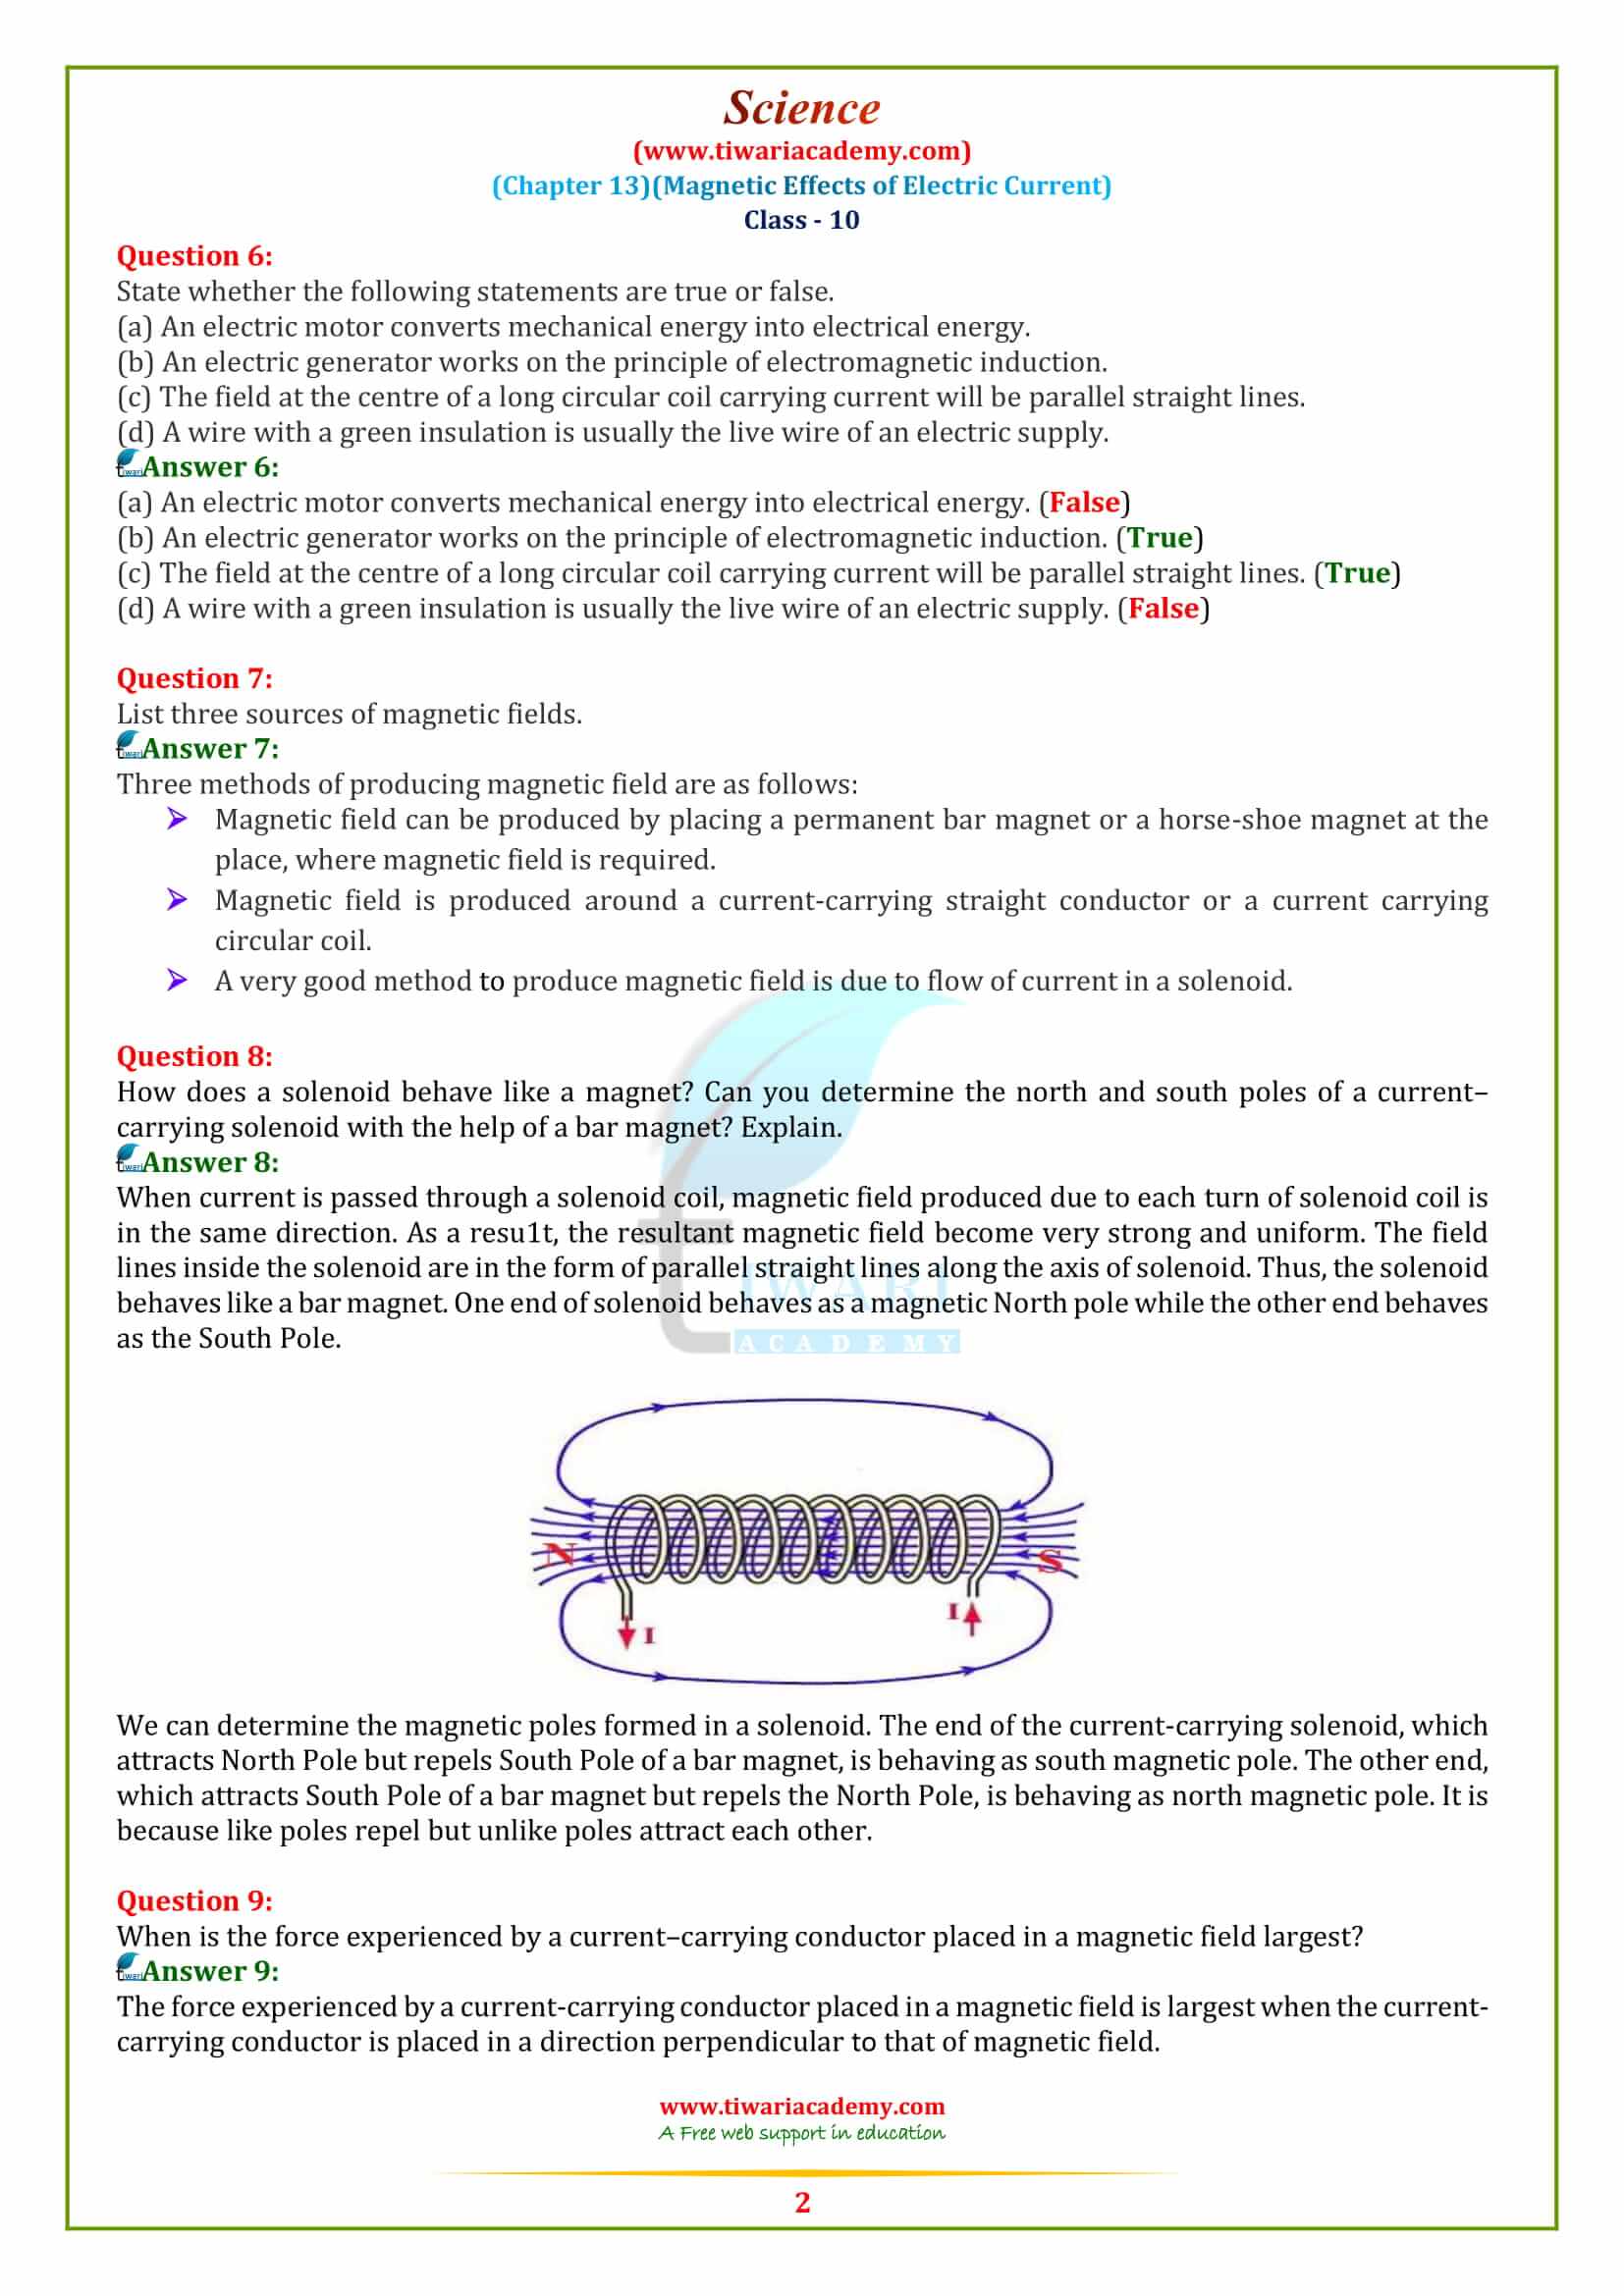 10 Science Chapter 13 Magnetic Effect of Electric Current Exercises solutions in pdf form